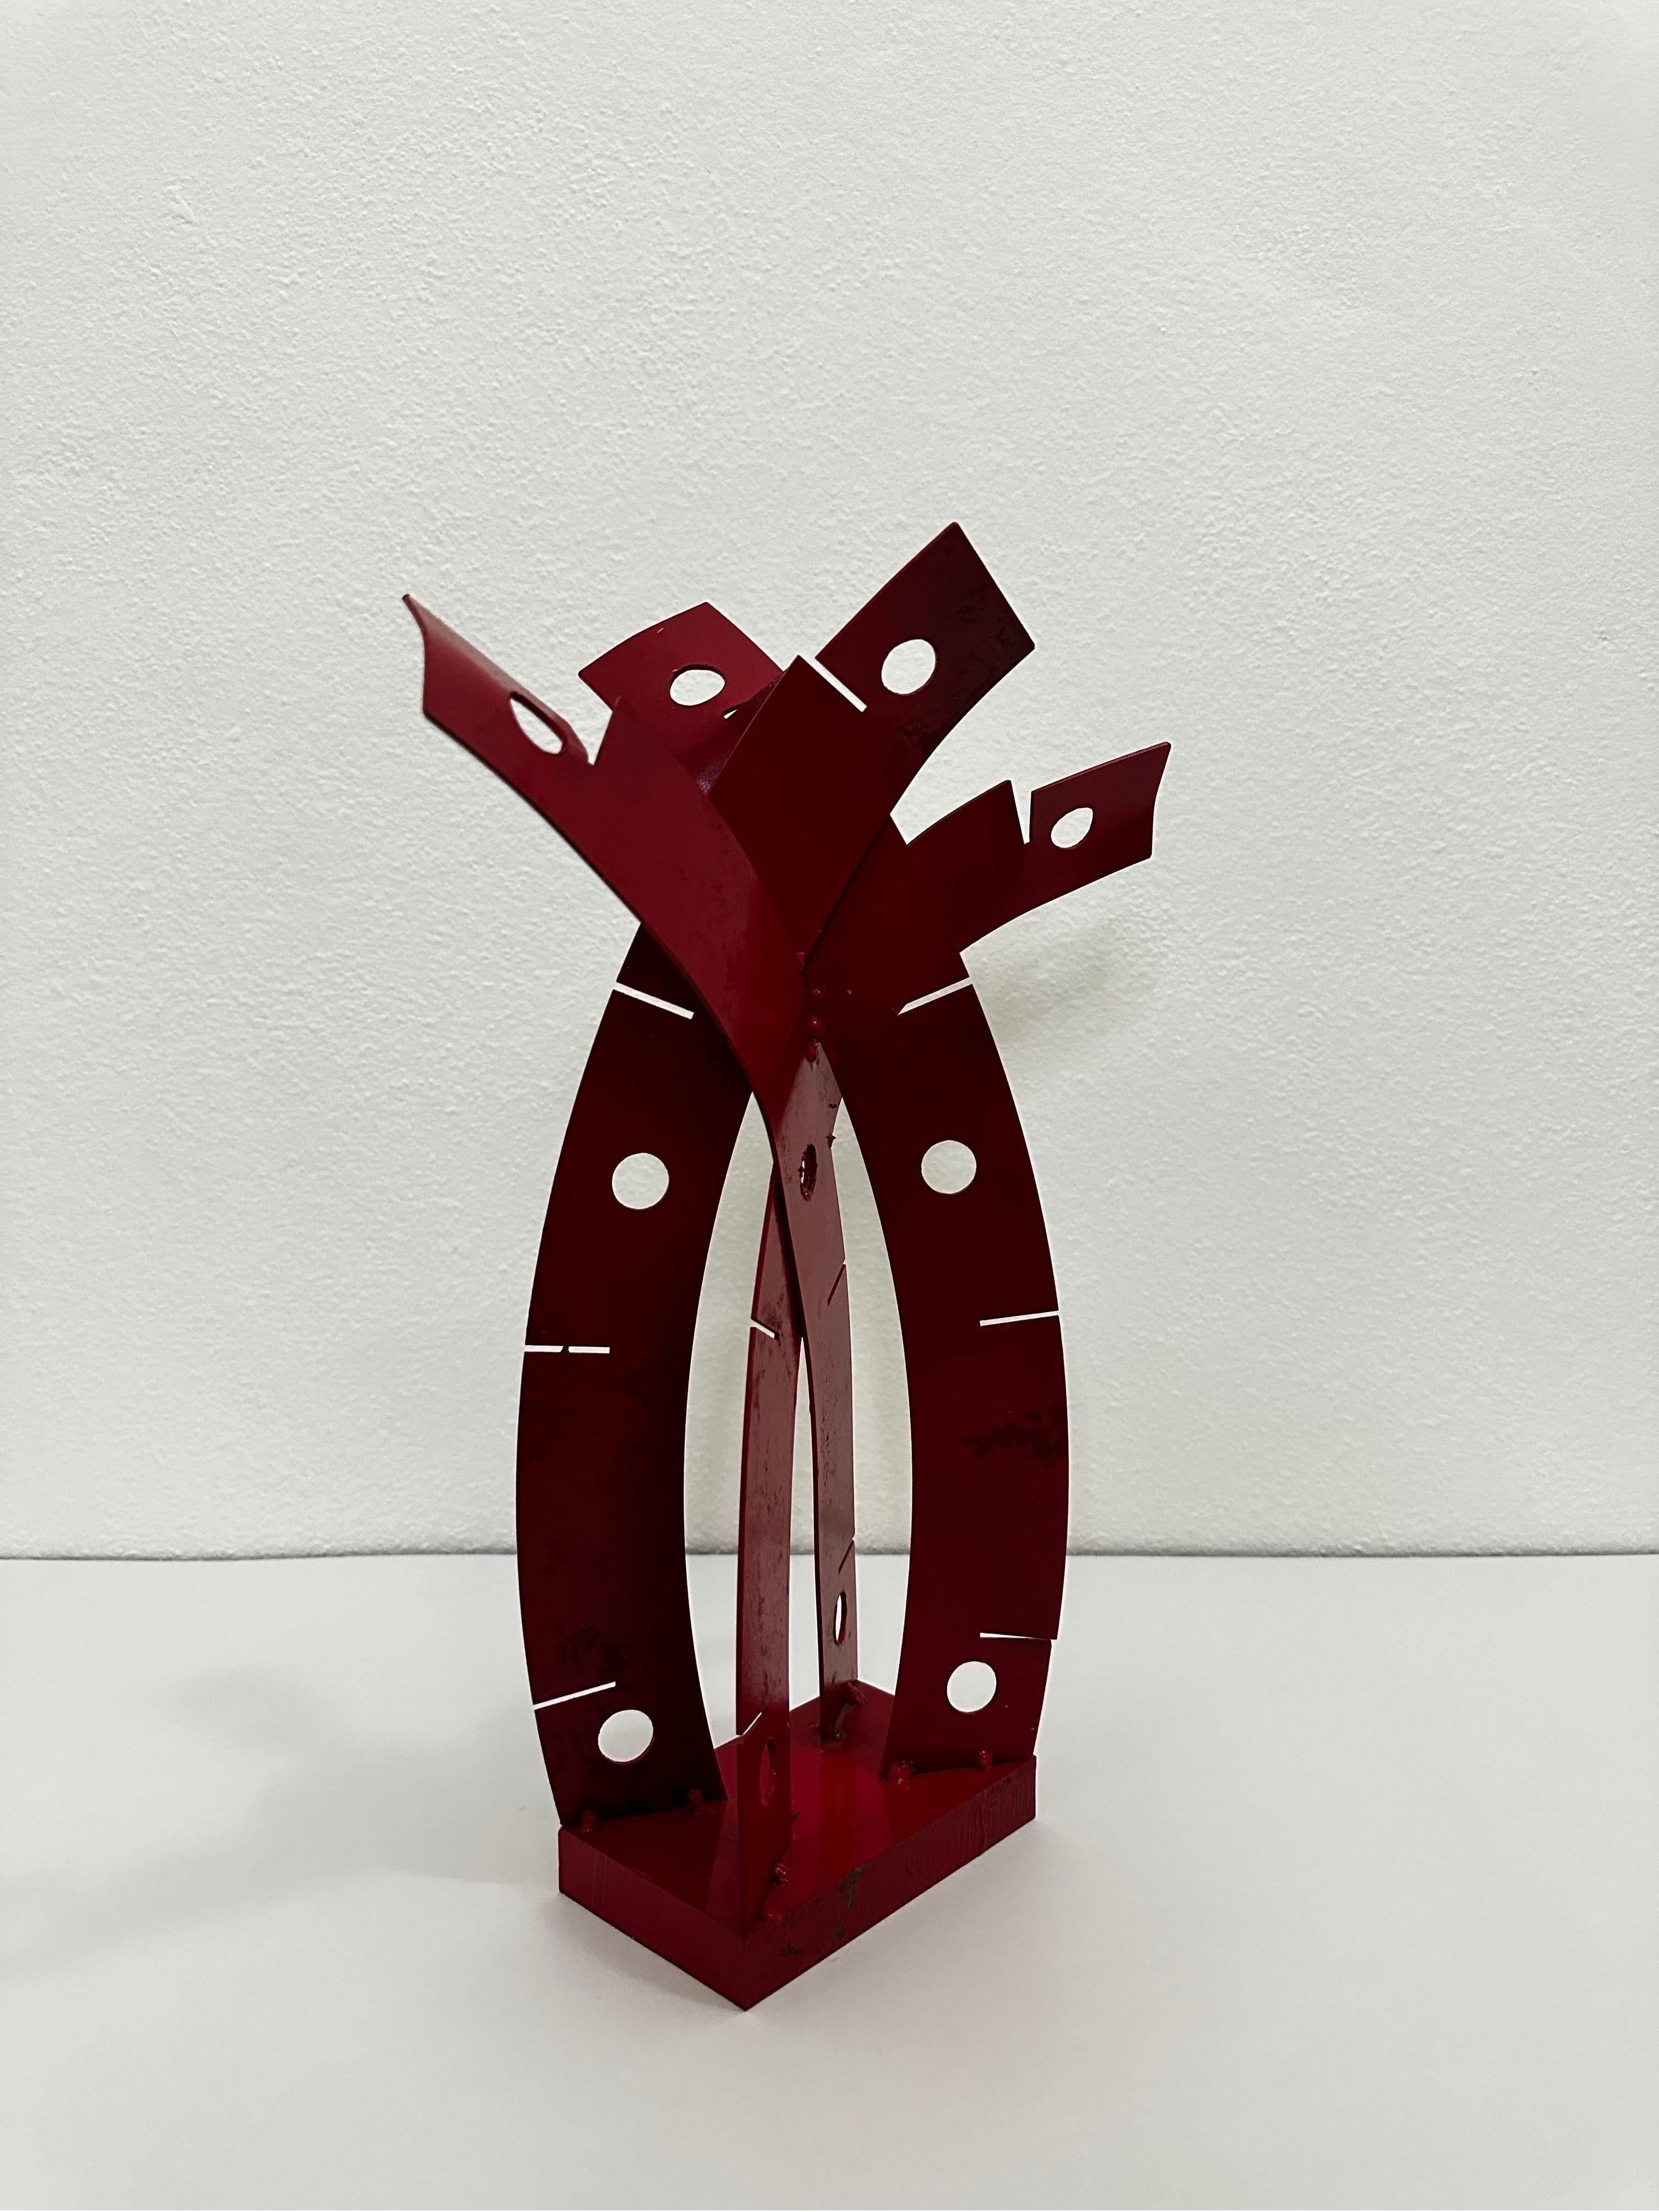 Brazilian Modern Red Lacquered Steel Table Sculpture, 1980s For Sale 1